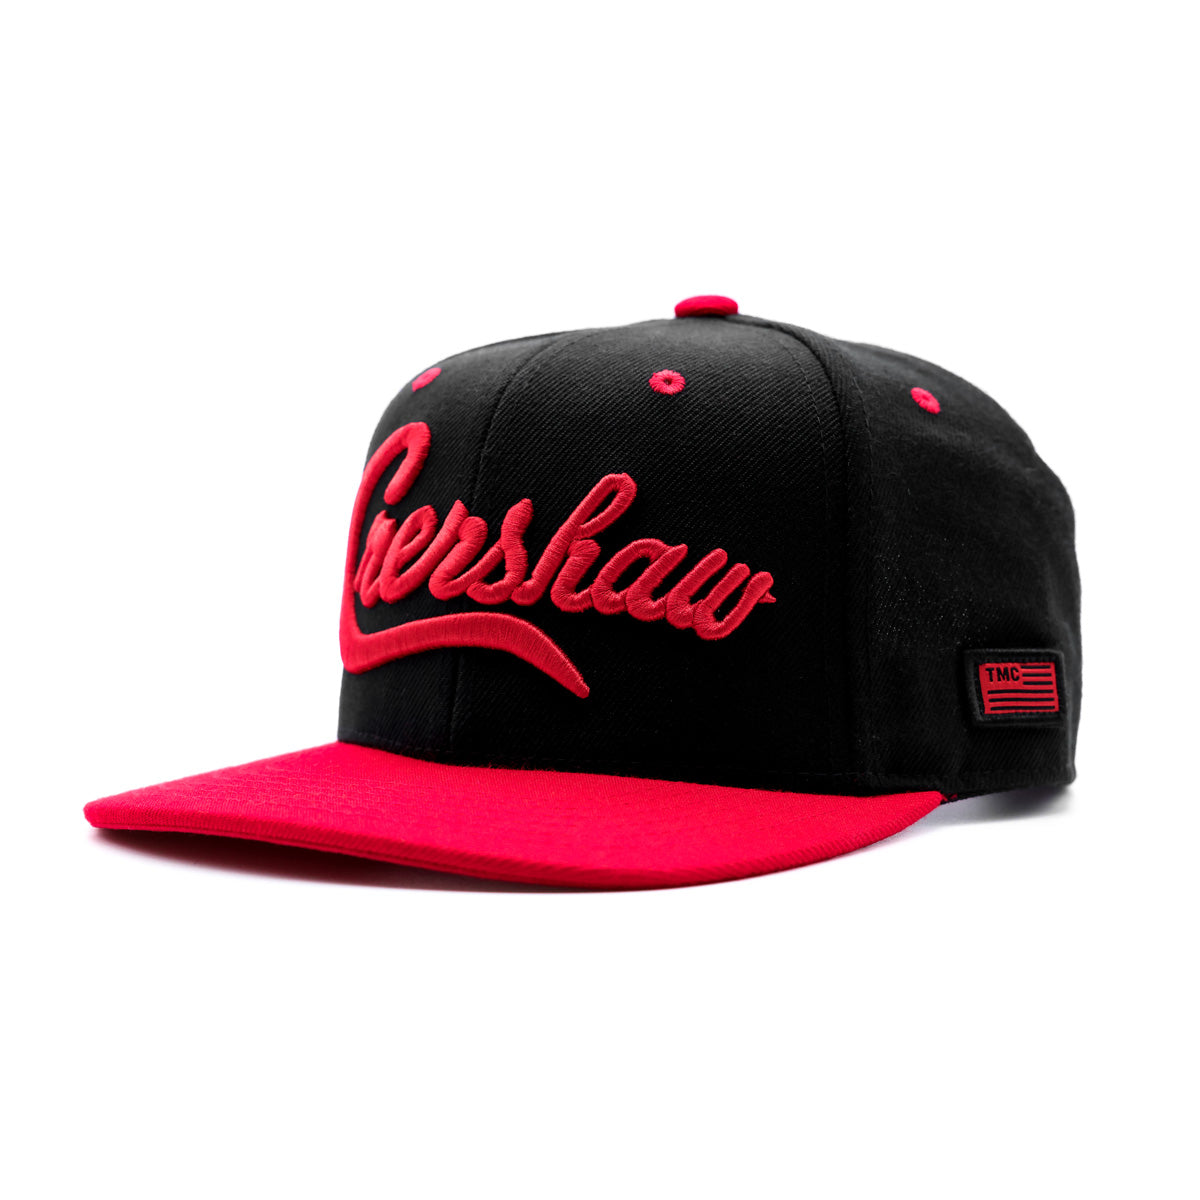 Crenshaw Limited Edition Snapback - Black/Red [Two-Tone] - Angle